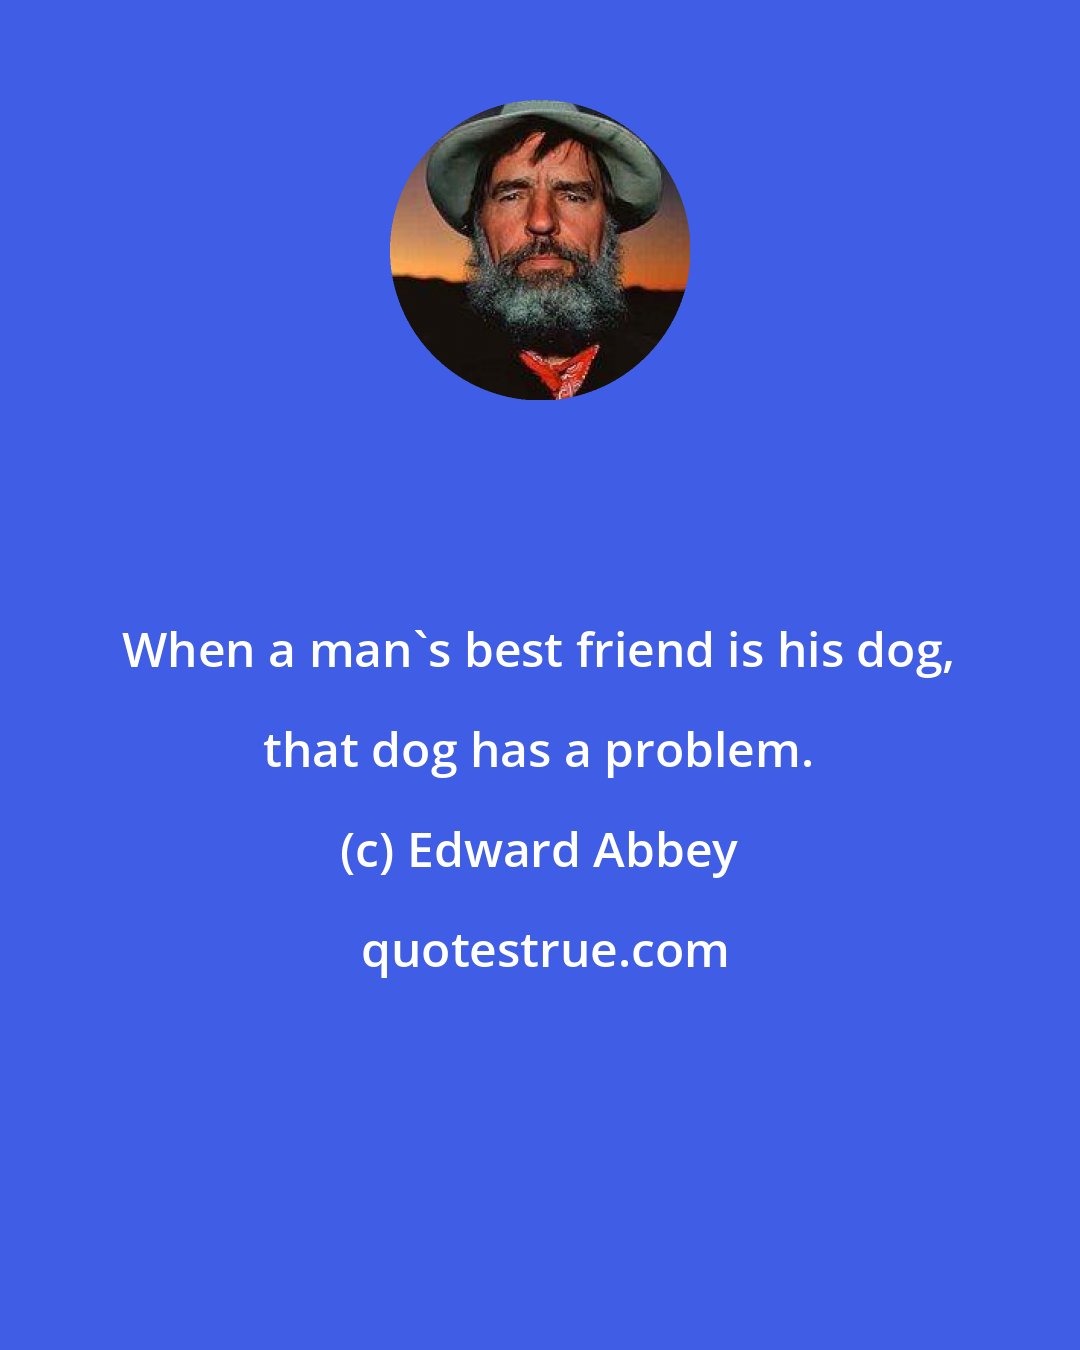 Edward Abbey: When a man's best friend is his dog, that dog has a problem.